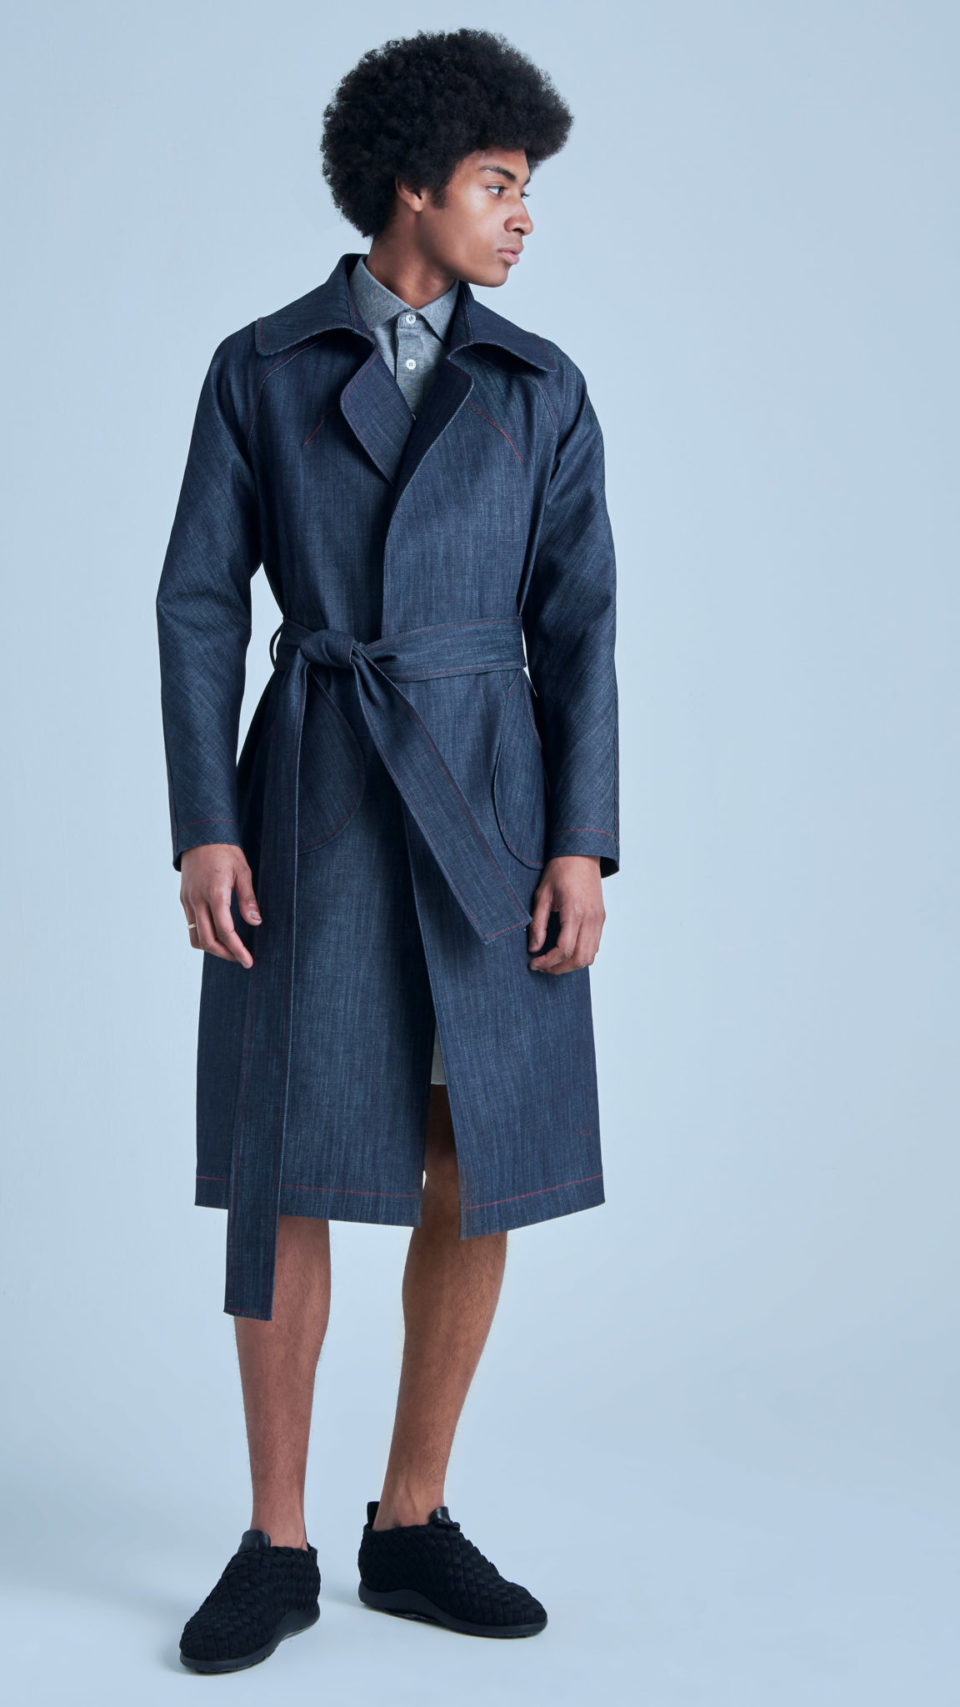 Trench coat made with denim from luxury brand MAR by Maria Karimi